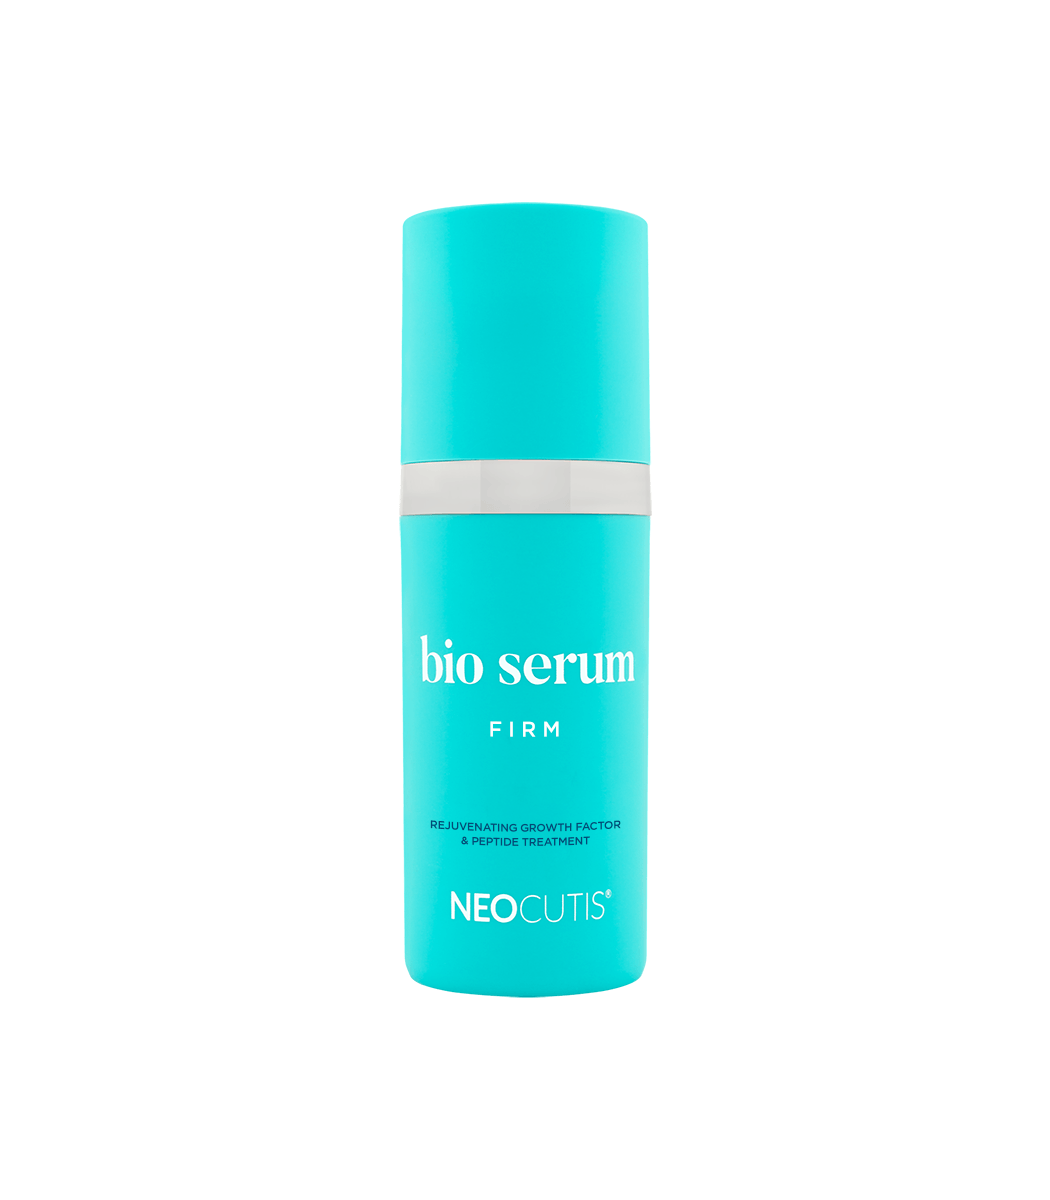 Neocutis Bio Serum Firm 30 mL - The Look and Co